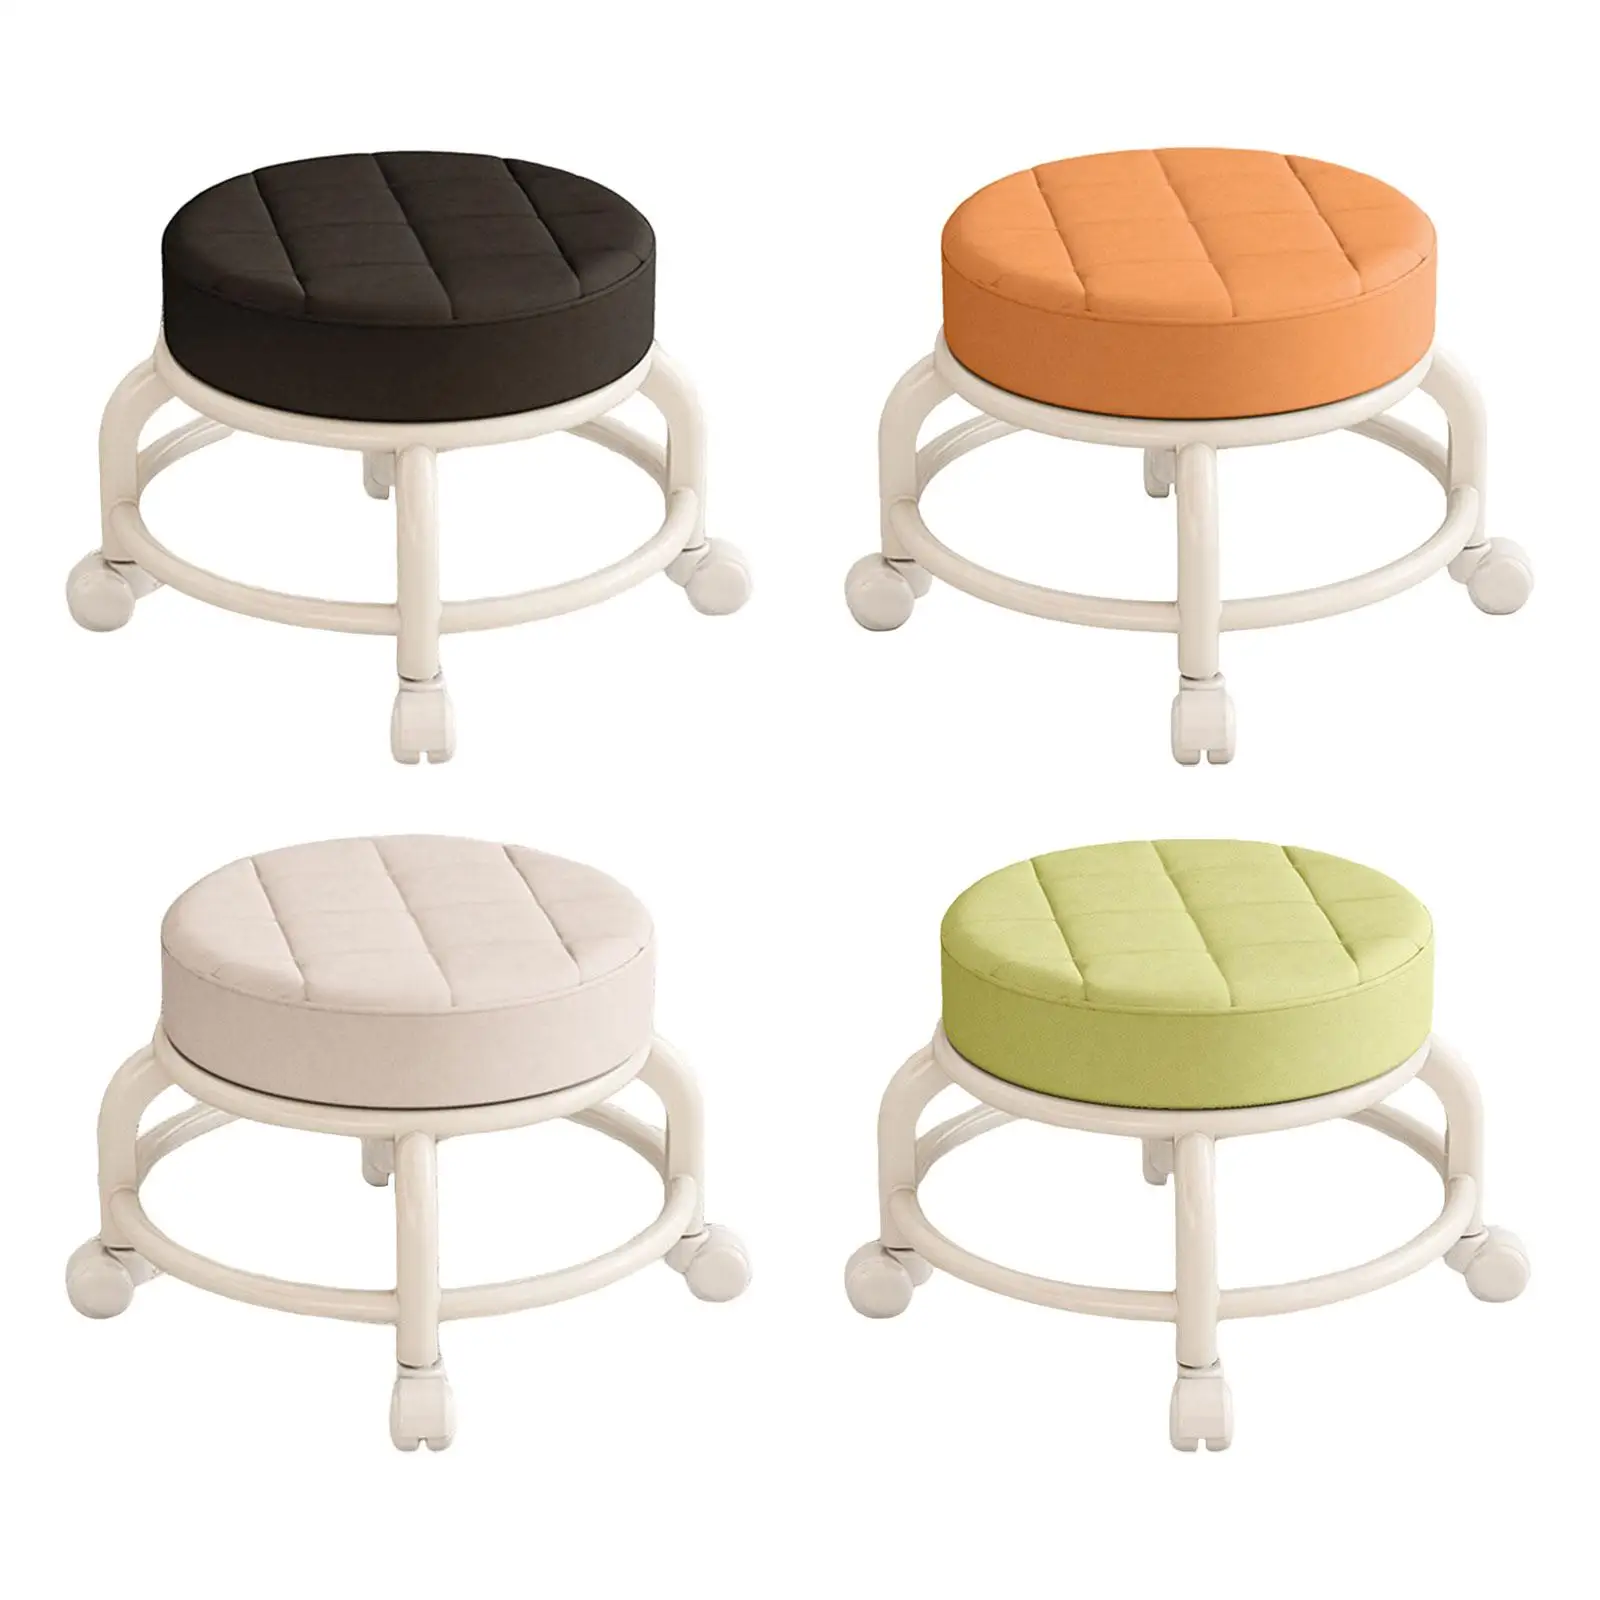 Low Round Roller Seat Stool PU Leather Seat Padded Portable Heavy Duty 360° Rotating Rolling Stool Pedicure Stool for Garage